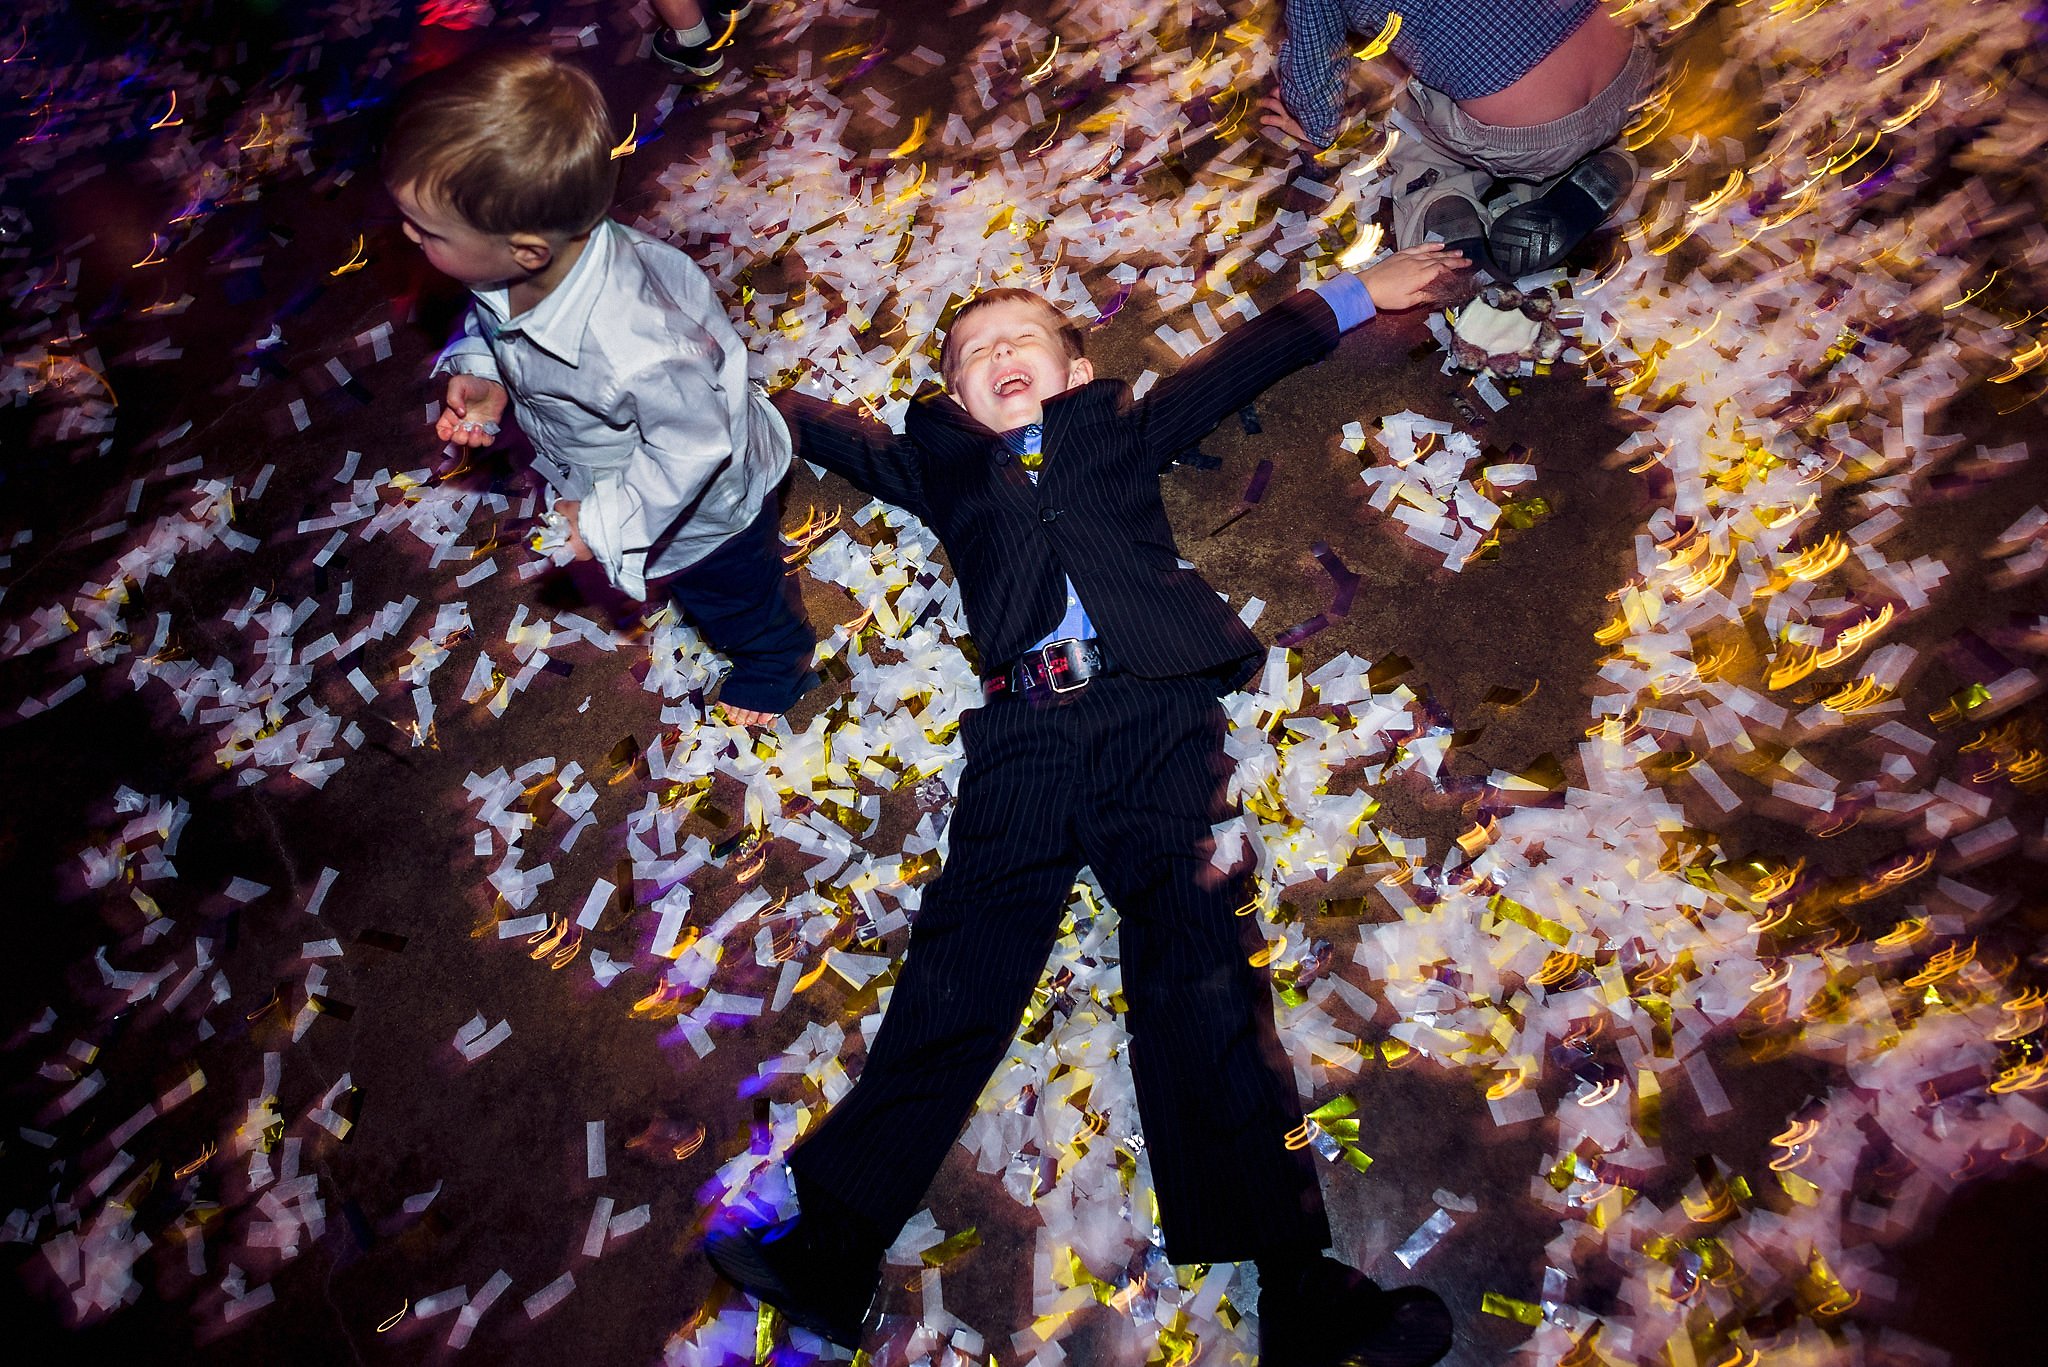 Kids making snow angels in the confetti on the dance floor in wedding reception at Pecan Ranch in Dripping Springs, Austin, Texas